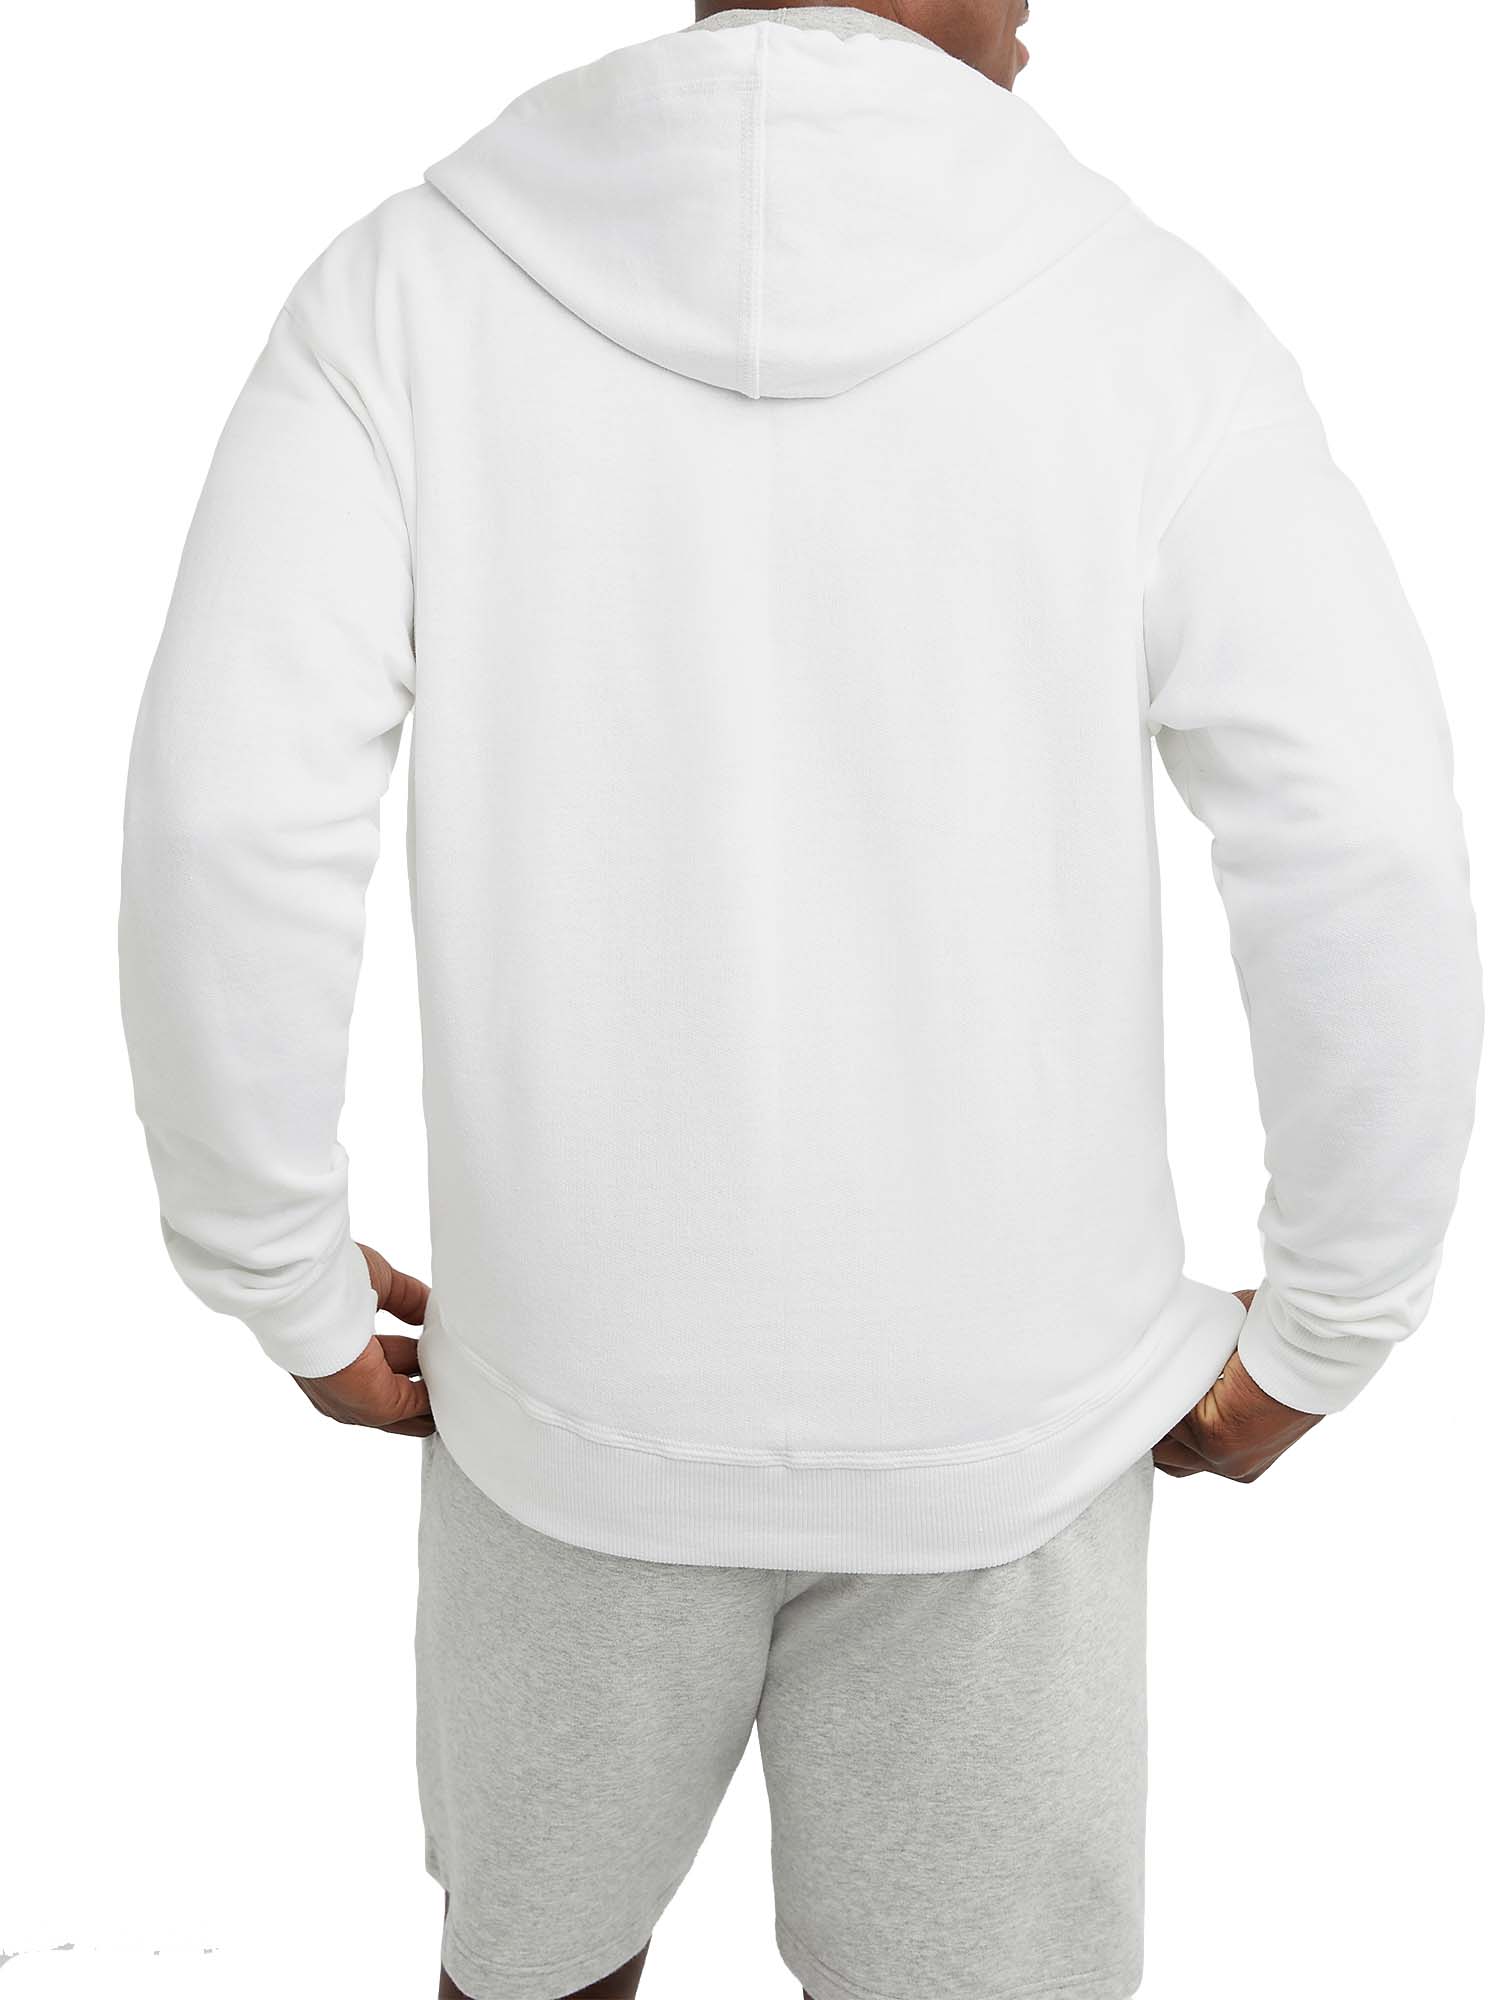 Champion Men's and Big Men's Powerblend Zip-Up Hoodie, Sizes up to 2XL - image 2 of 7